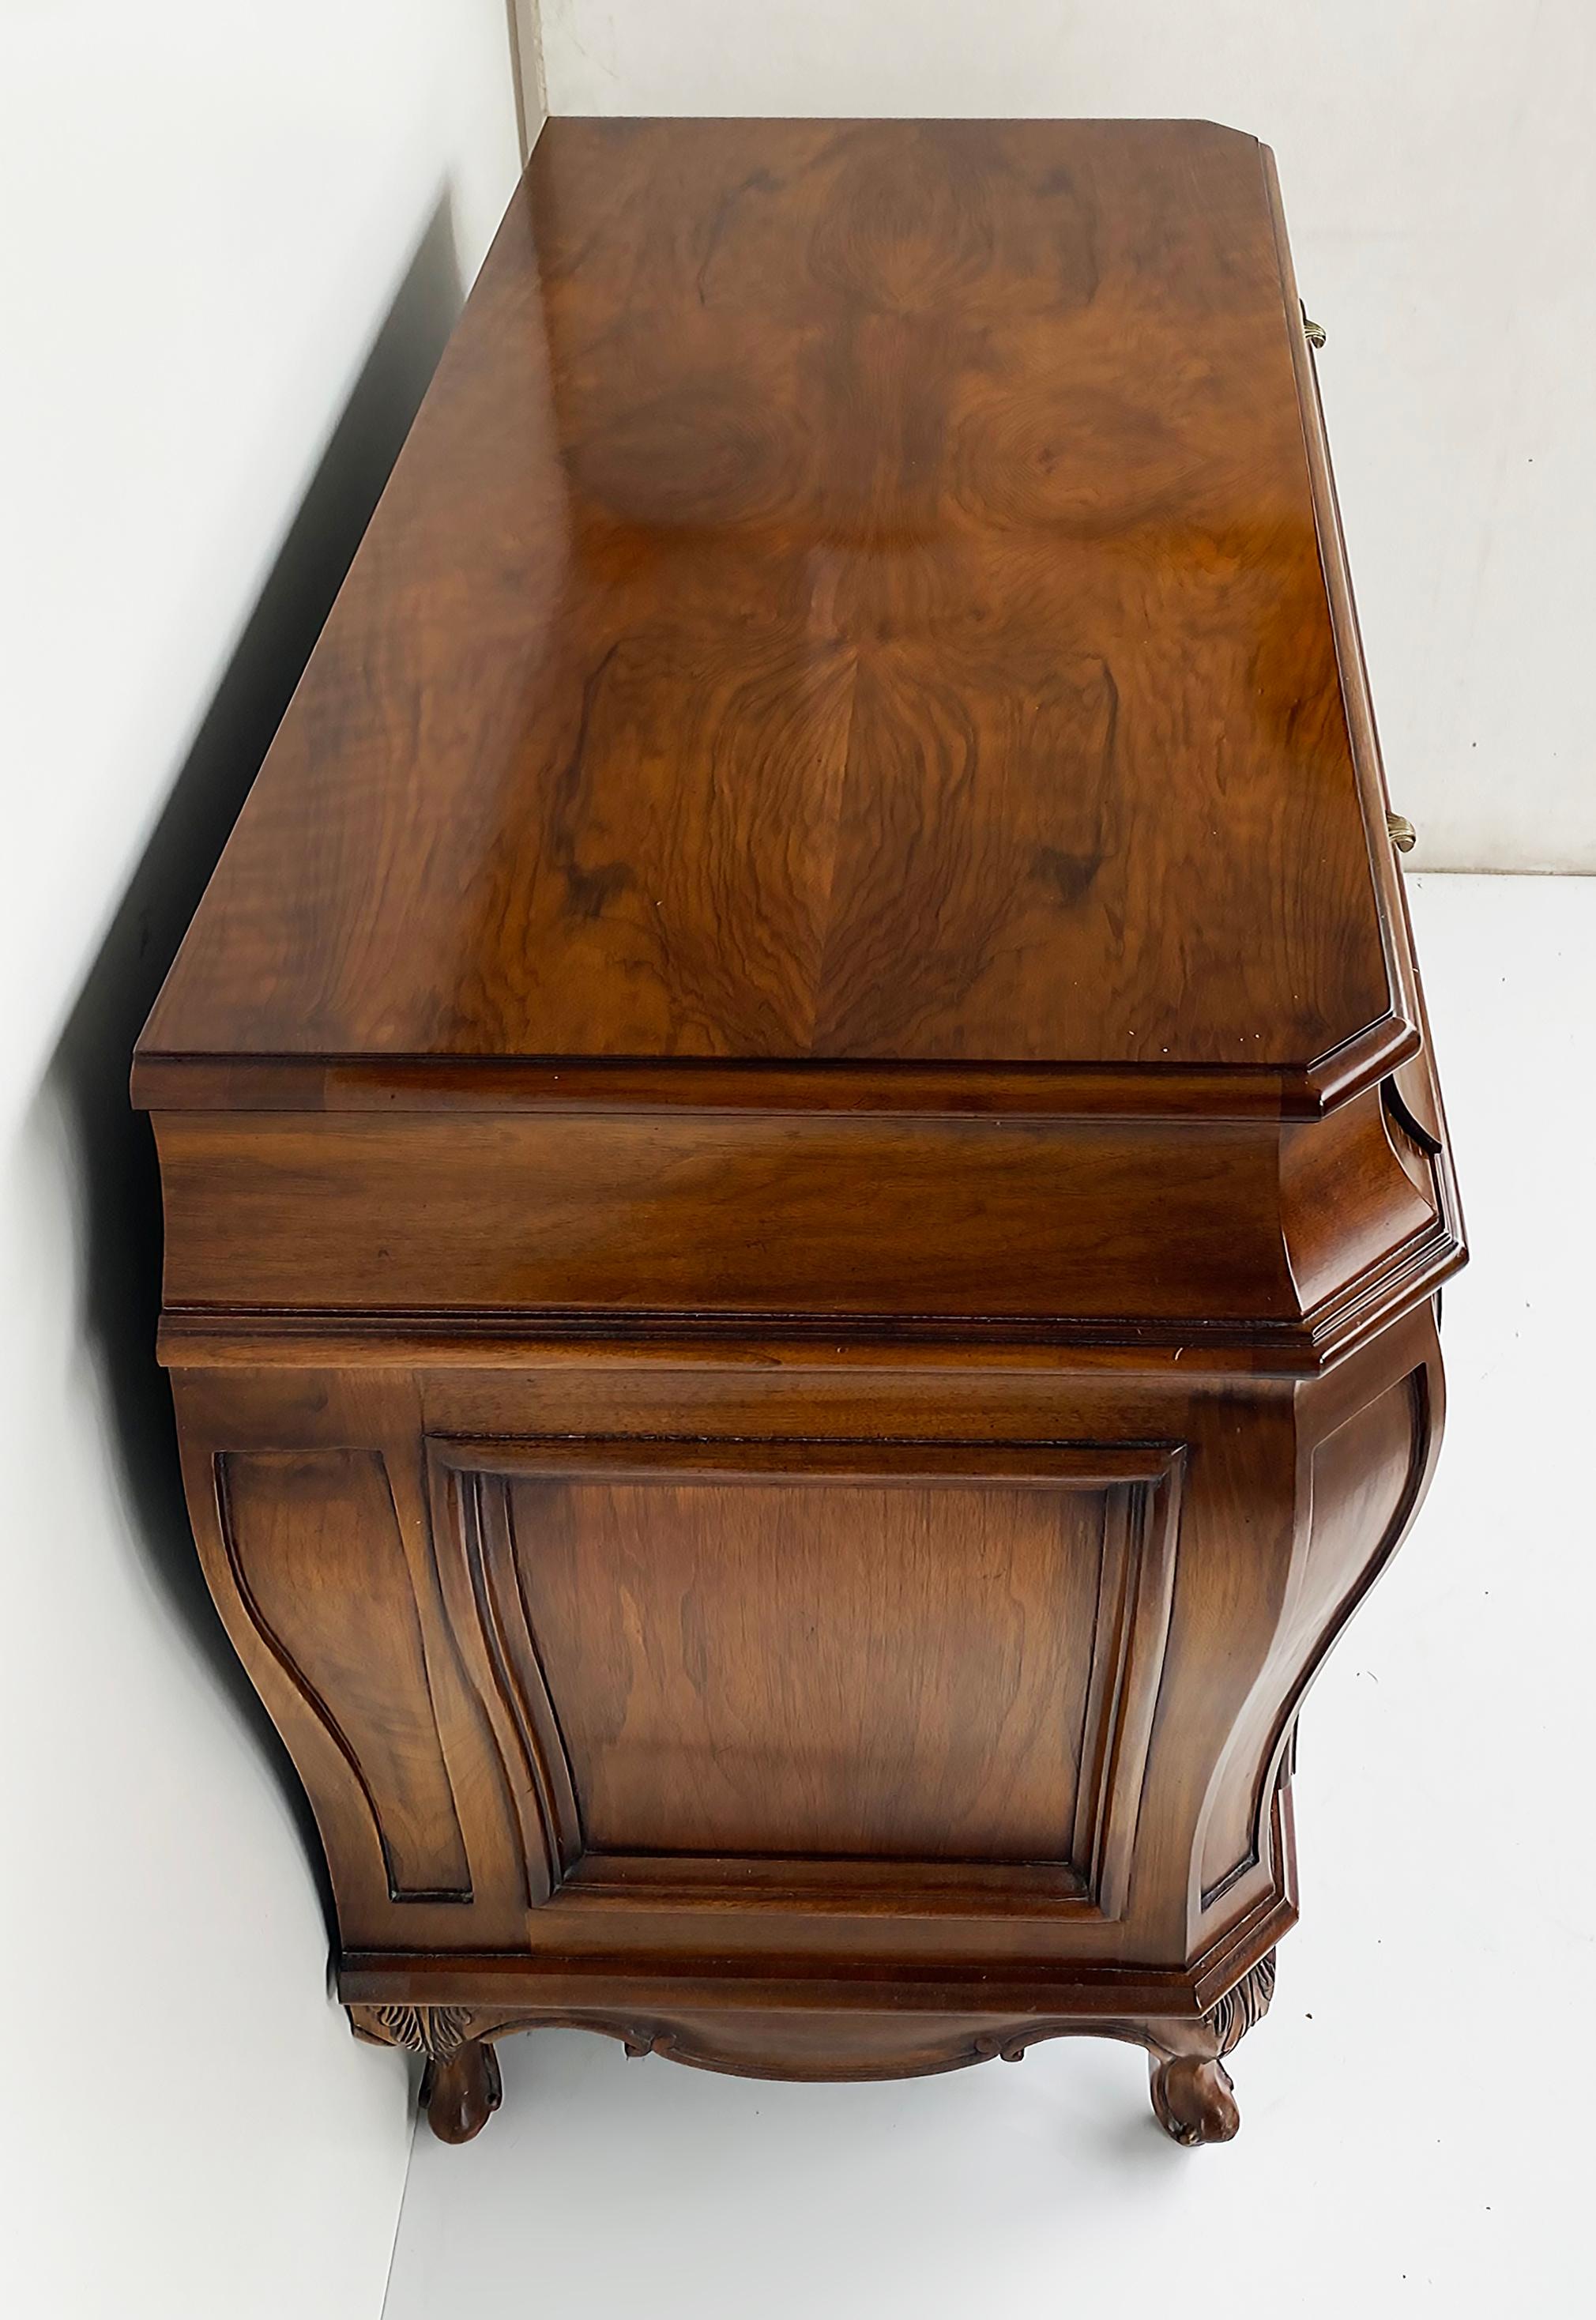 American Karges Furniture Louis XVI Bombe 3-Drawer Commode, Burl Walnut For Sale